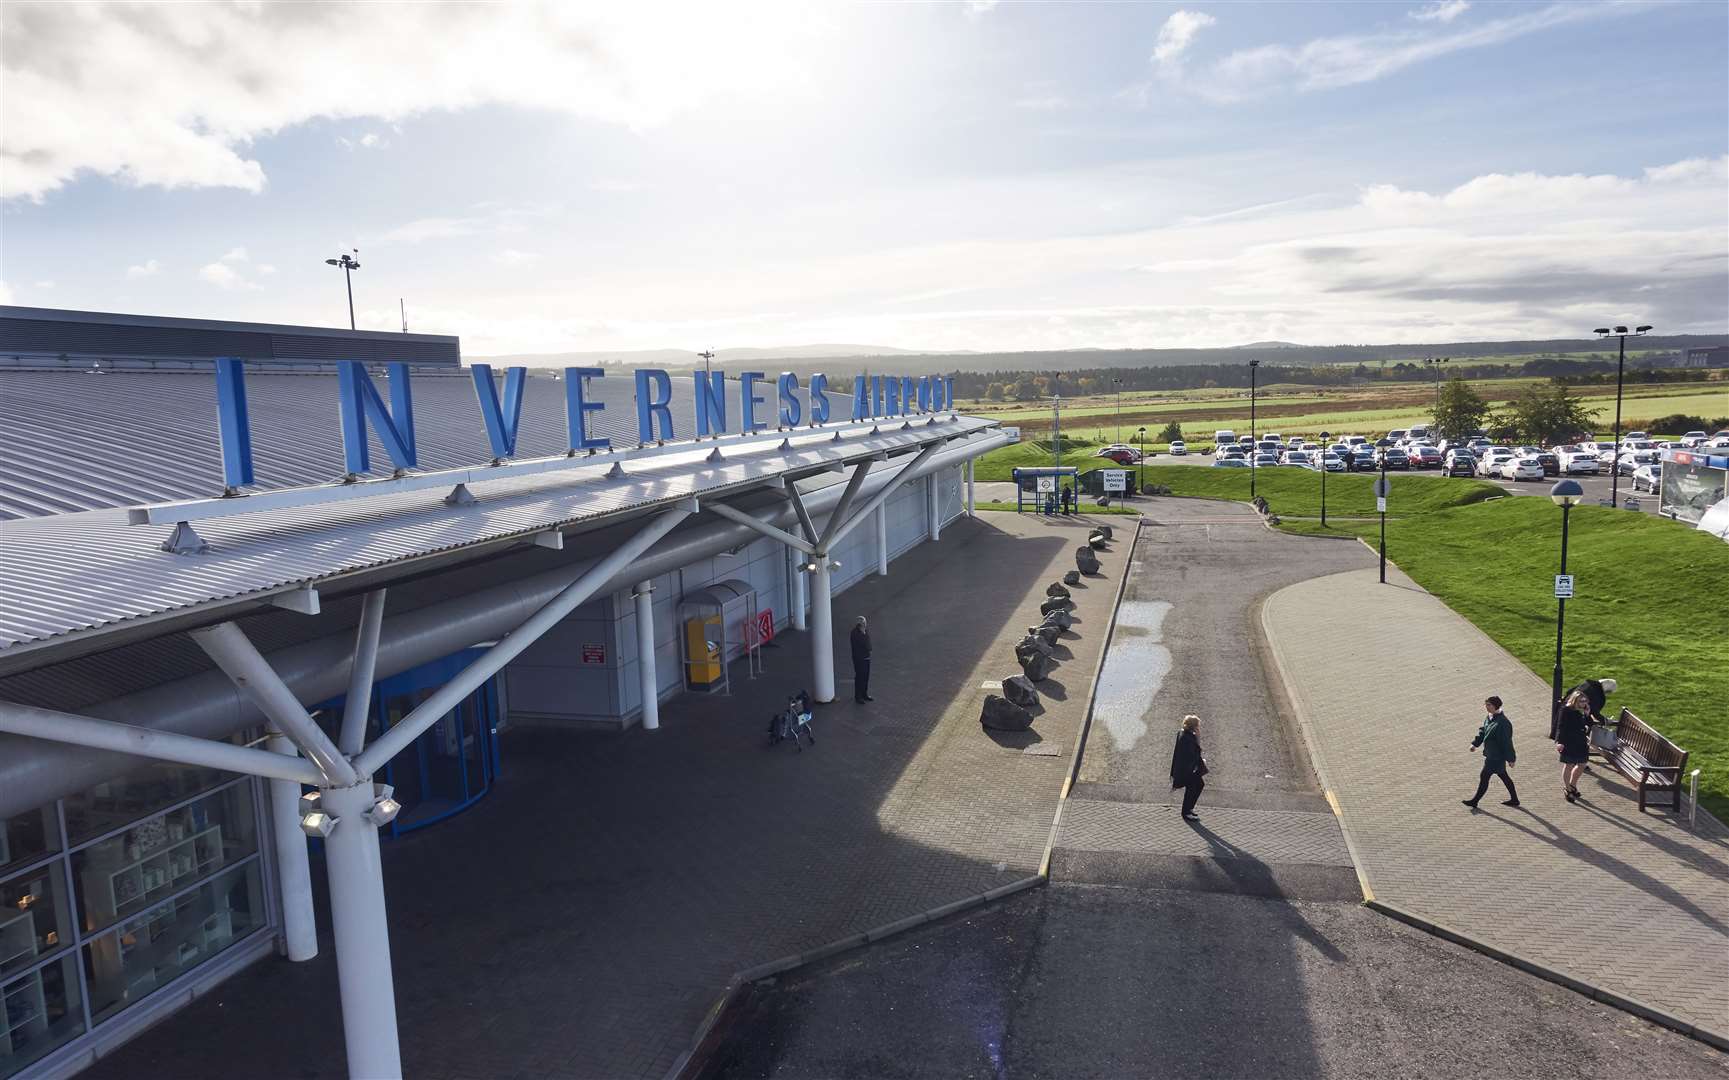 Inverness Airport.